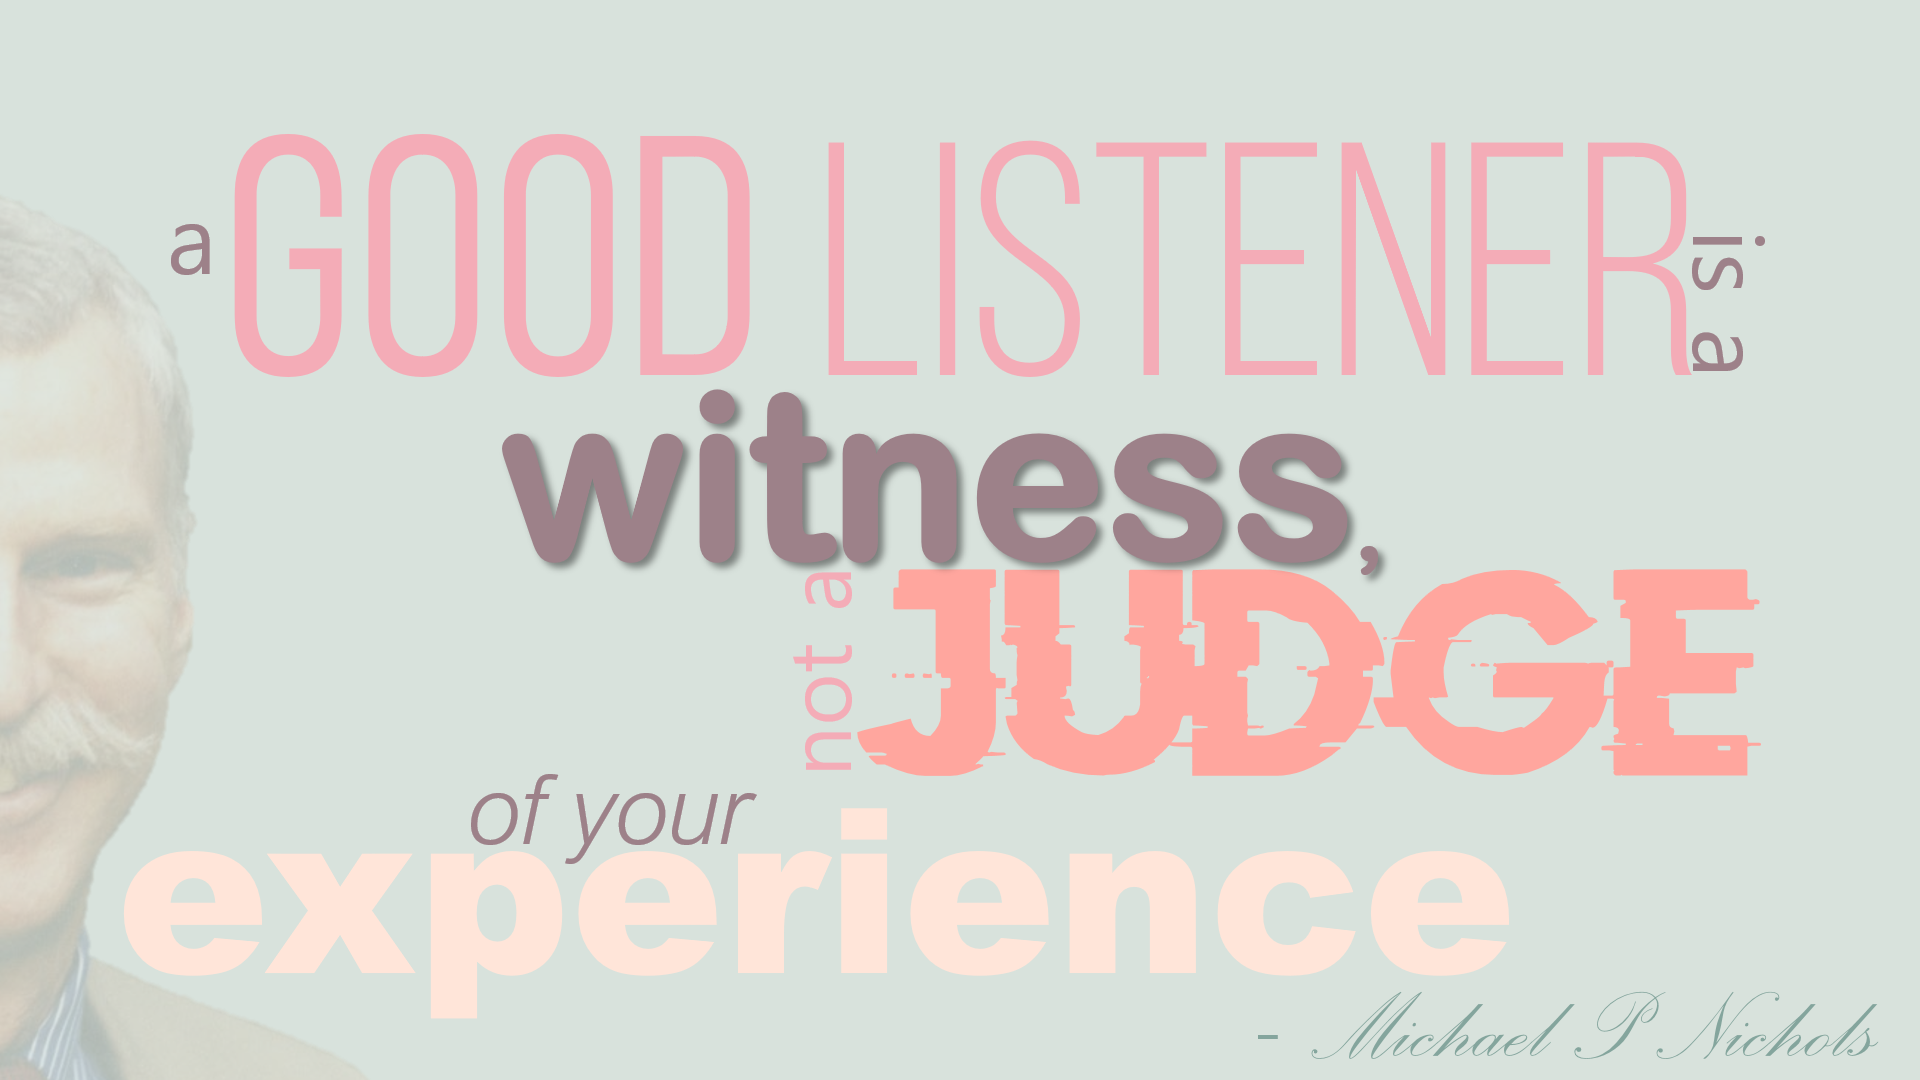 A good listener is a witness, not a judge of your experience